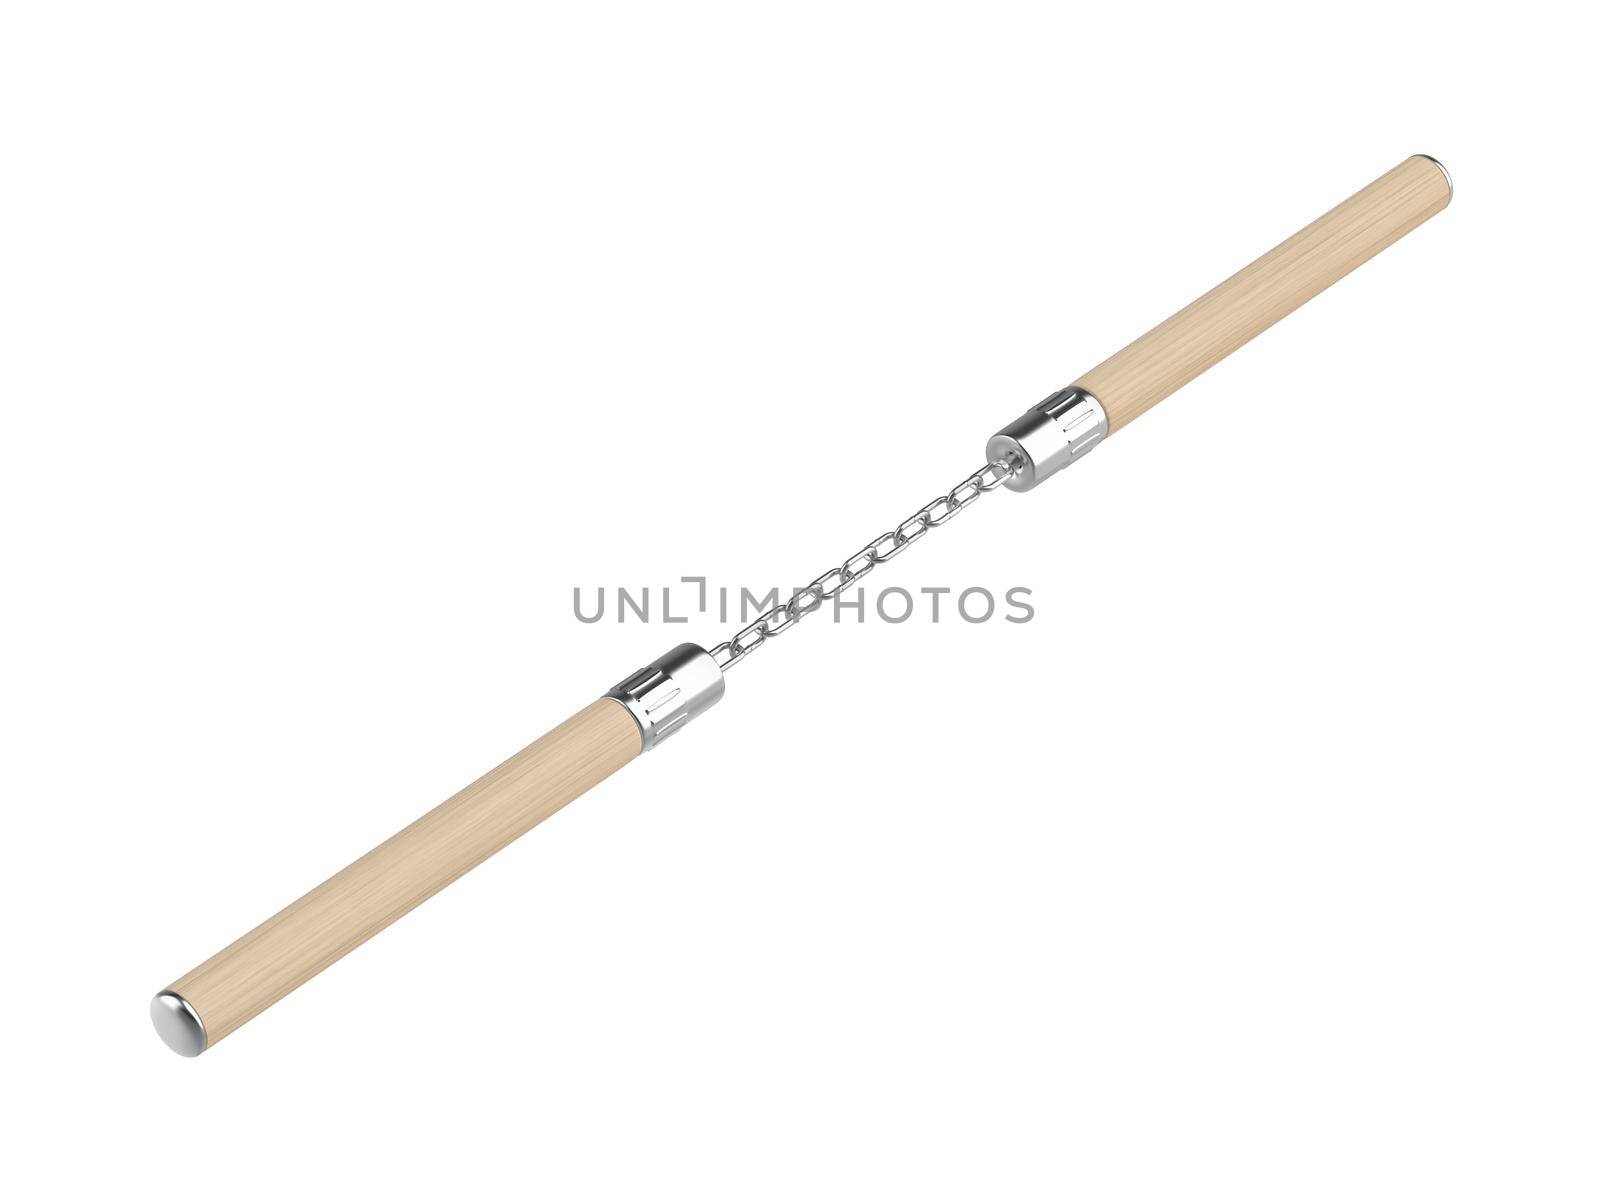 Wooden nunchaku with chain, isolated on white background